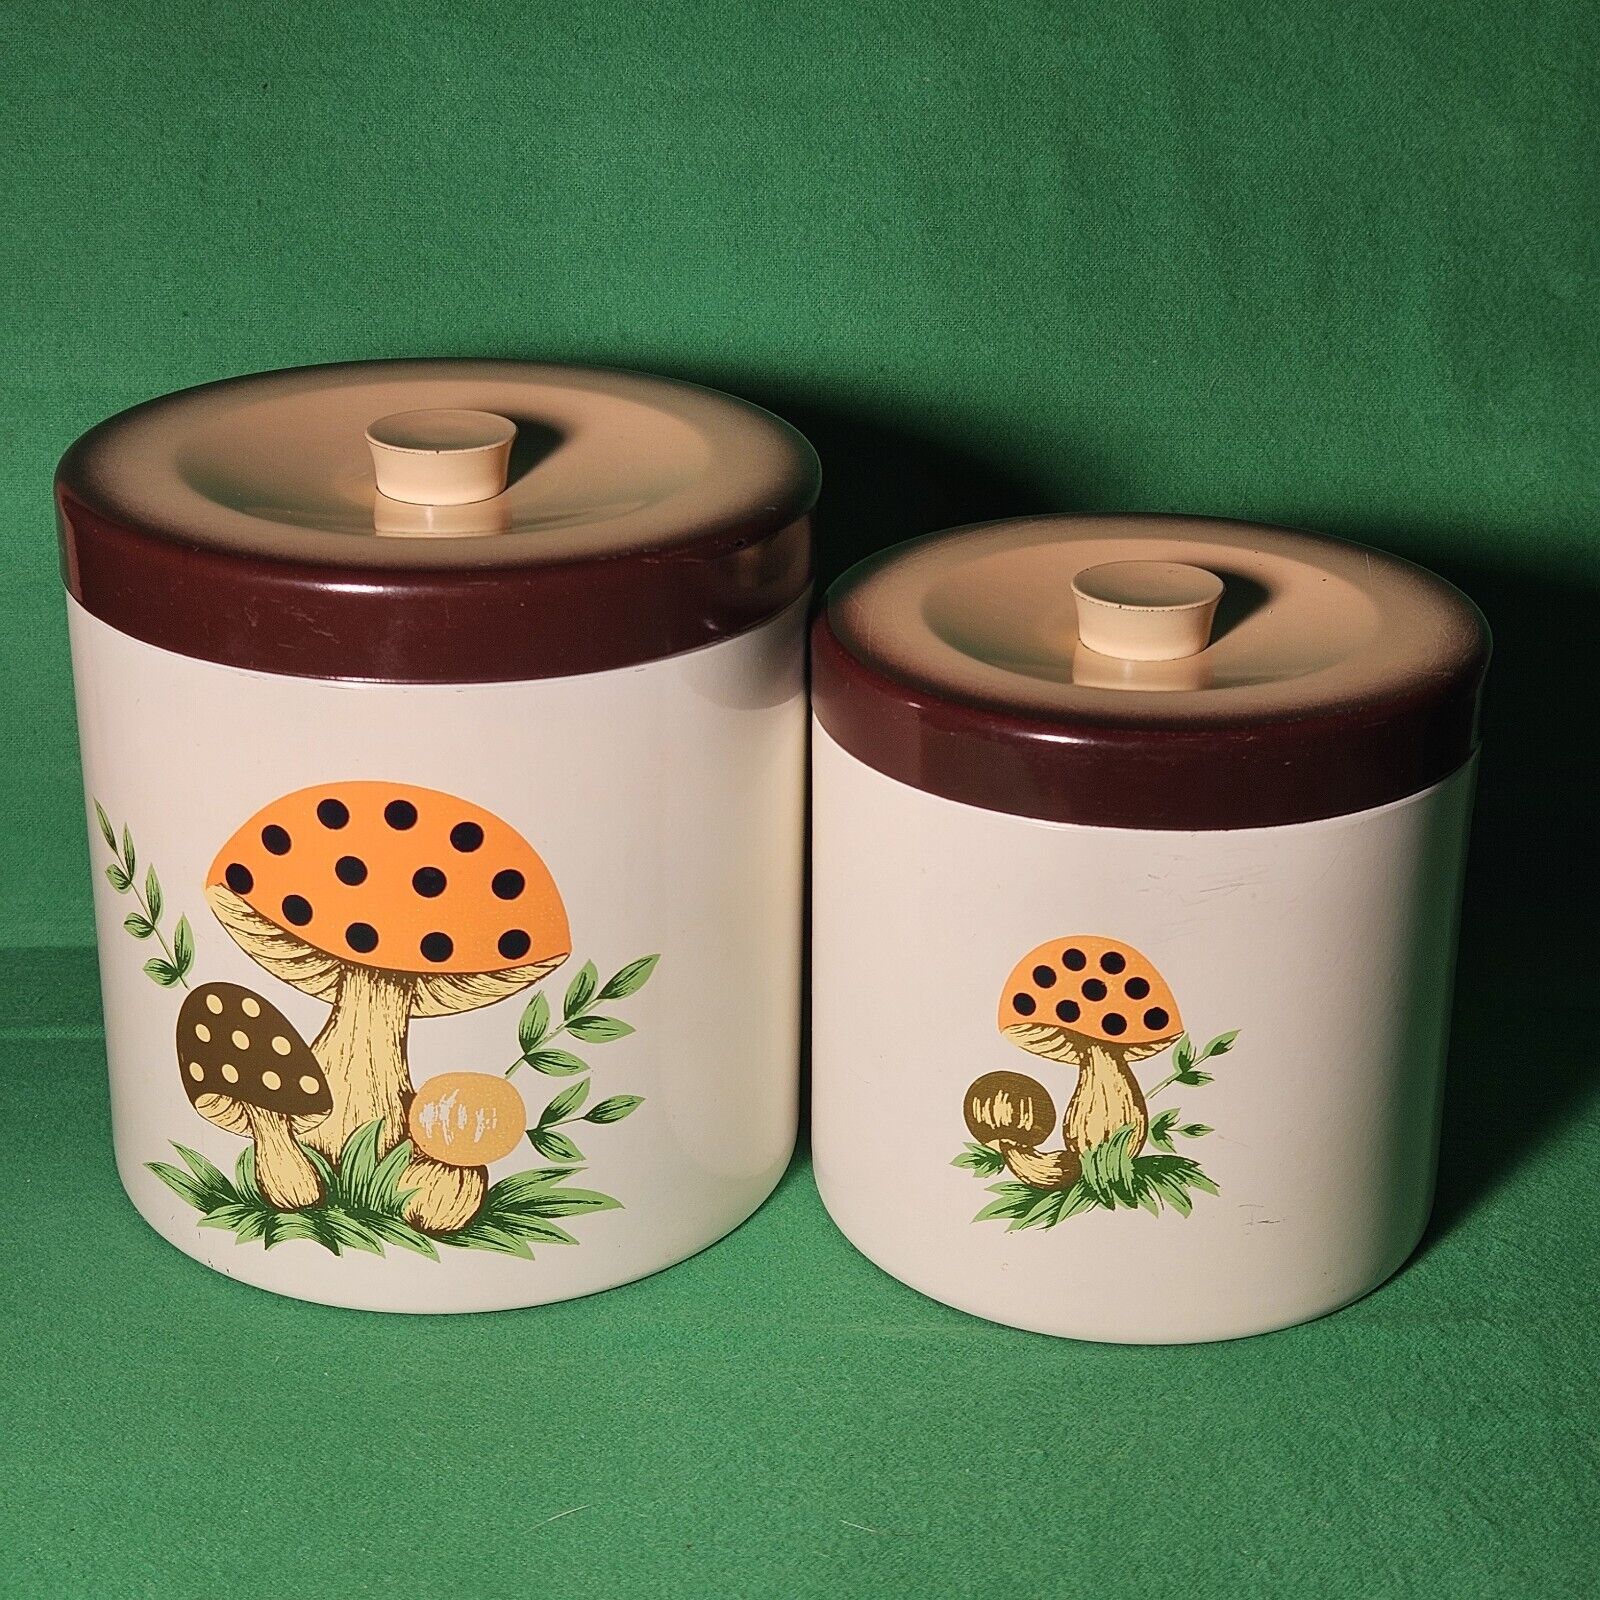 Vtg Merry Mushroom Canister 1978 Sears Roebuck And Co Lacquerware Set Of 2 Japan